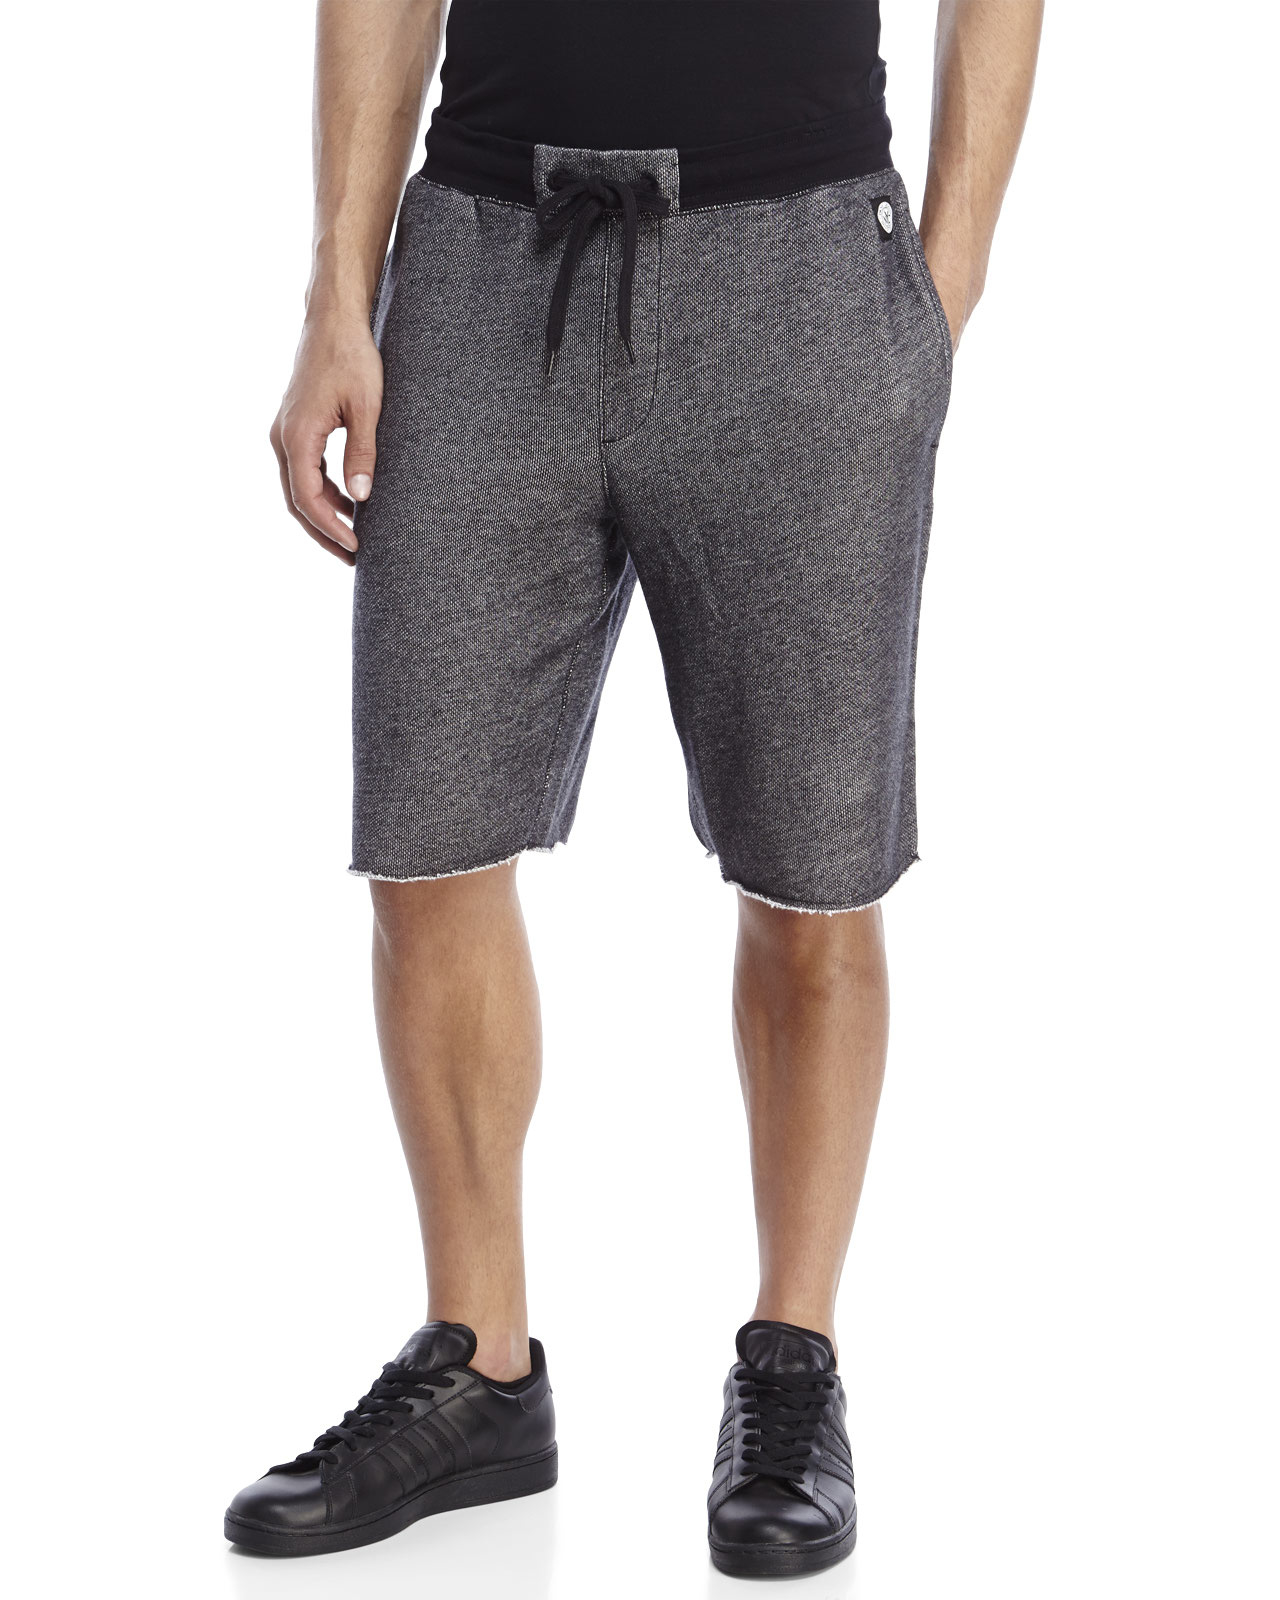 Lyst - Dkny French Terry Shorts in Black for Men